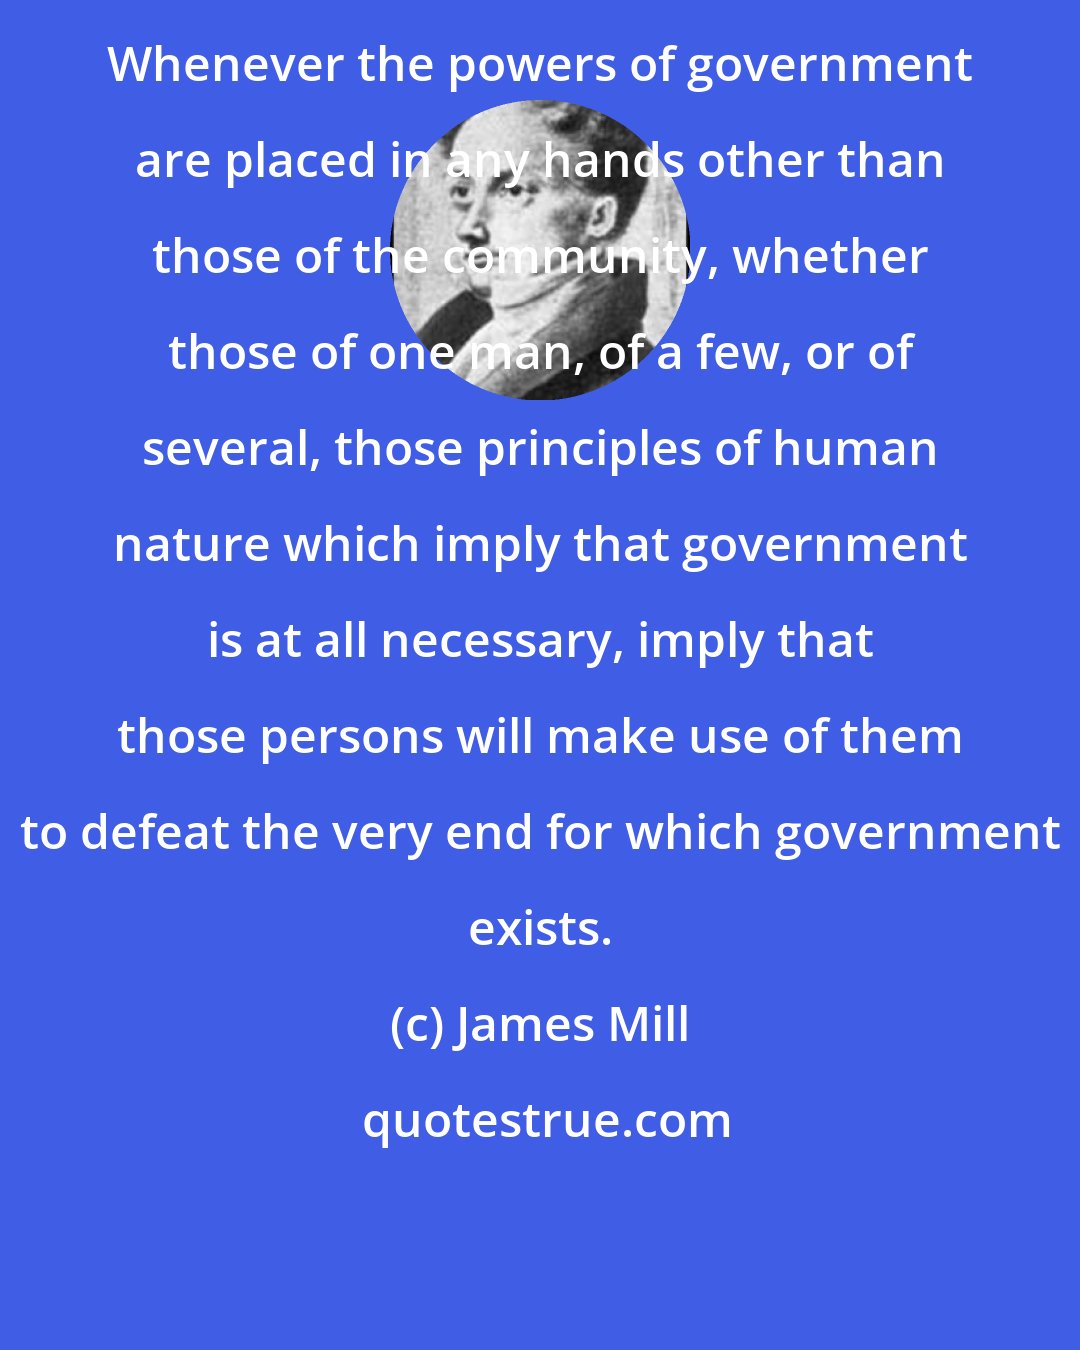 James Mill: Whenever the powers of government are placed in any hands other than those of the community, whether those of one man, of a few, or of several, those principles of human nature which imply that government is at all necessary, imply that those persons will make use of them to defeat the very end for which government exists.